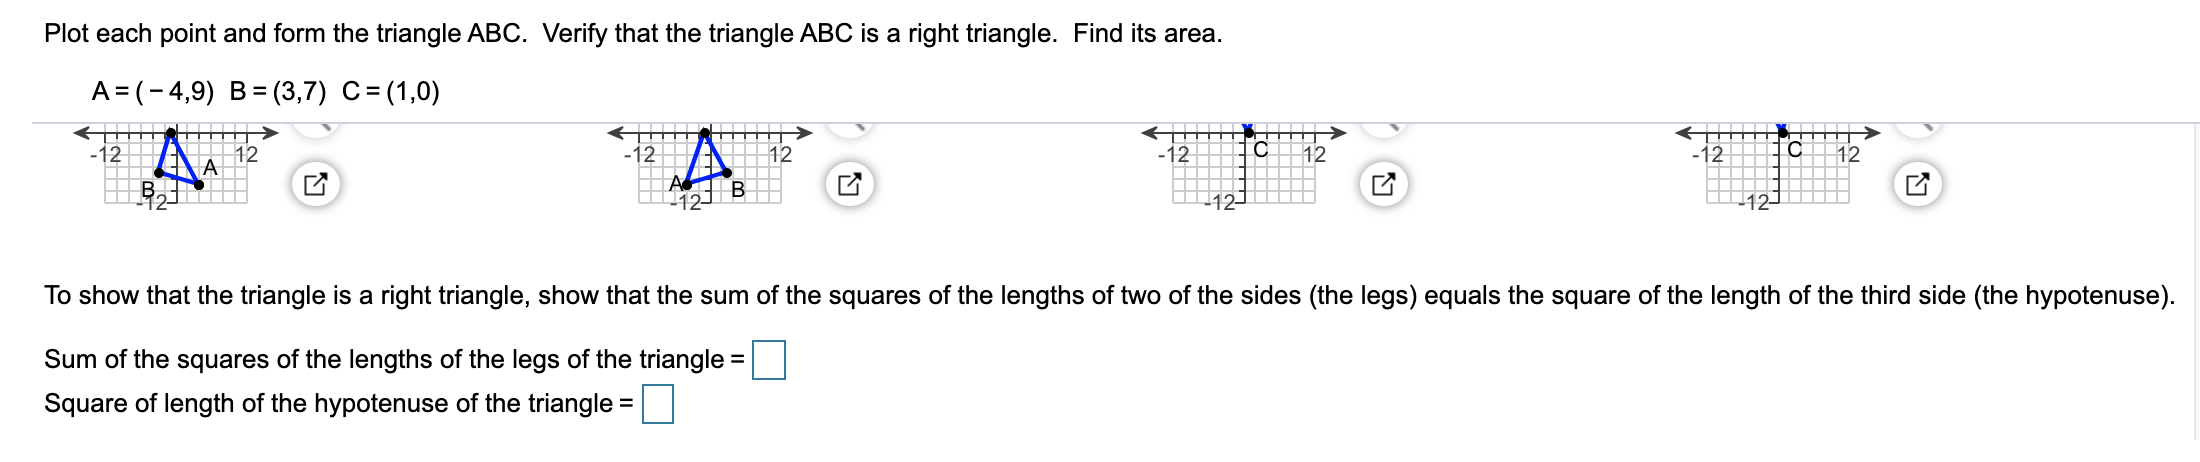 Plot each point and form the triangle ABC. Verify that the triangle ABC is a right triangle. Find its area.
A= (-4,9) B= (3,7) C=(1,0)
-12||
12
12
12
12
12
12
A
12
To show that the triangle is a right triangle, show that the sum of the squares of the lengths of two of the sides (the legs) equals the square of the length of the third side (the hypotenuse).
Sum of the squares of the lengths of the legs of the triangle =
Square of length of the hypotenuse of the triangle =
